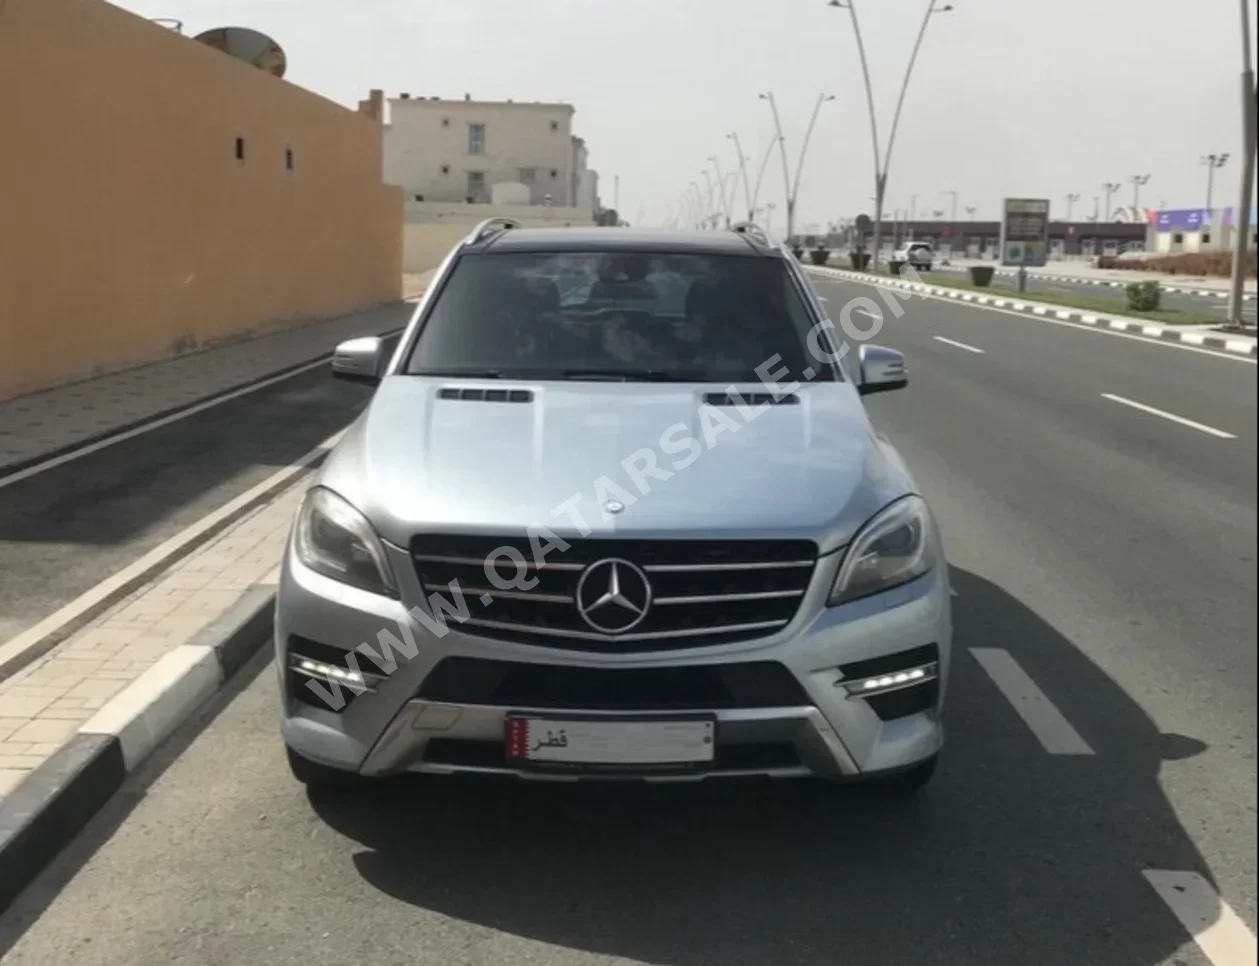 Mercedes-Benz  ML  350 AMG  2014  Automatic  176,000 Km  6 Cylinder  Four Wheel Drive (4WD)  SUV  Silver